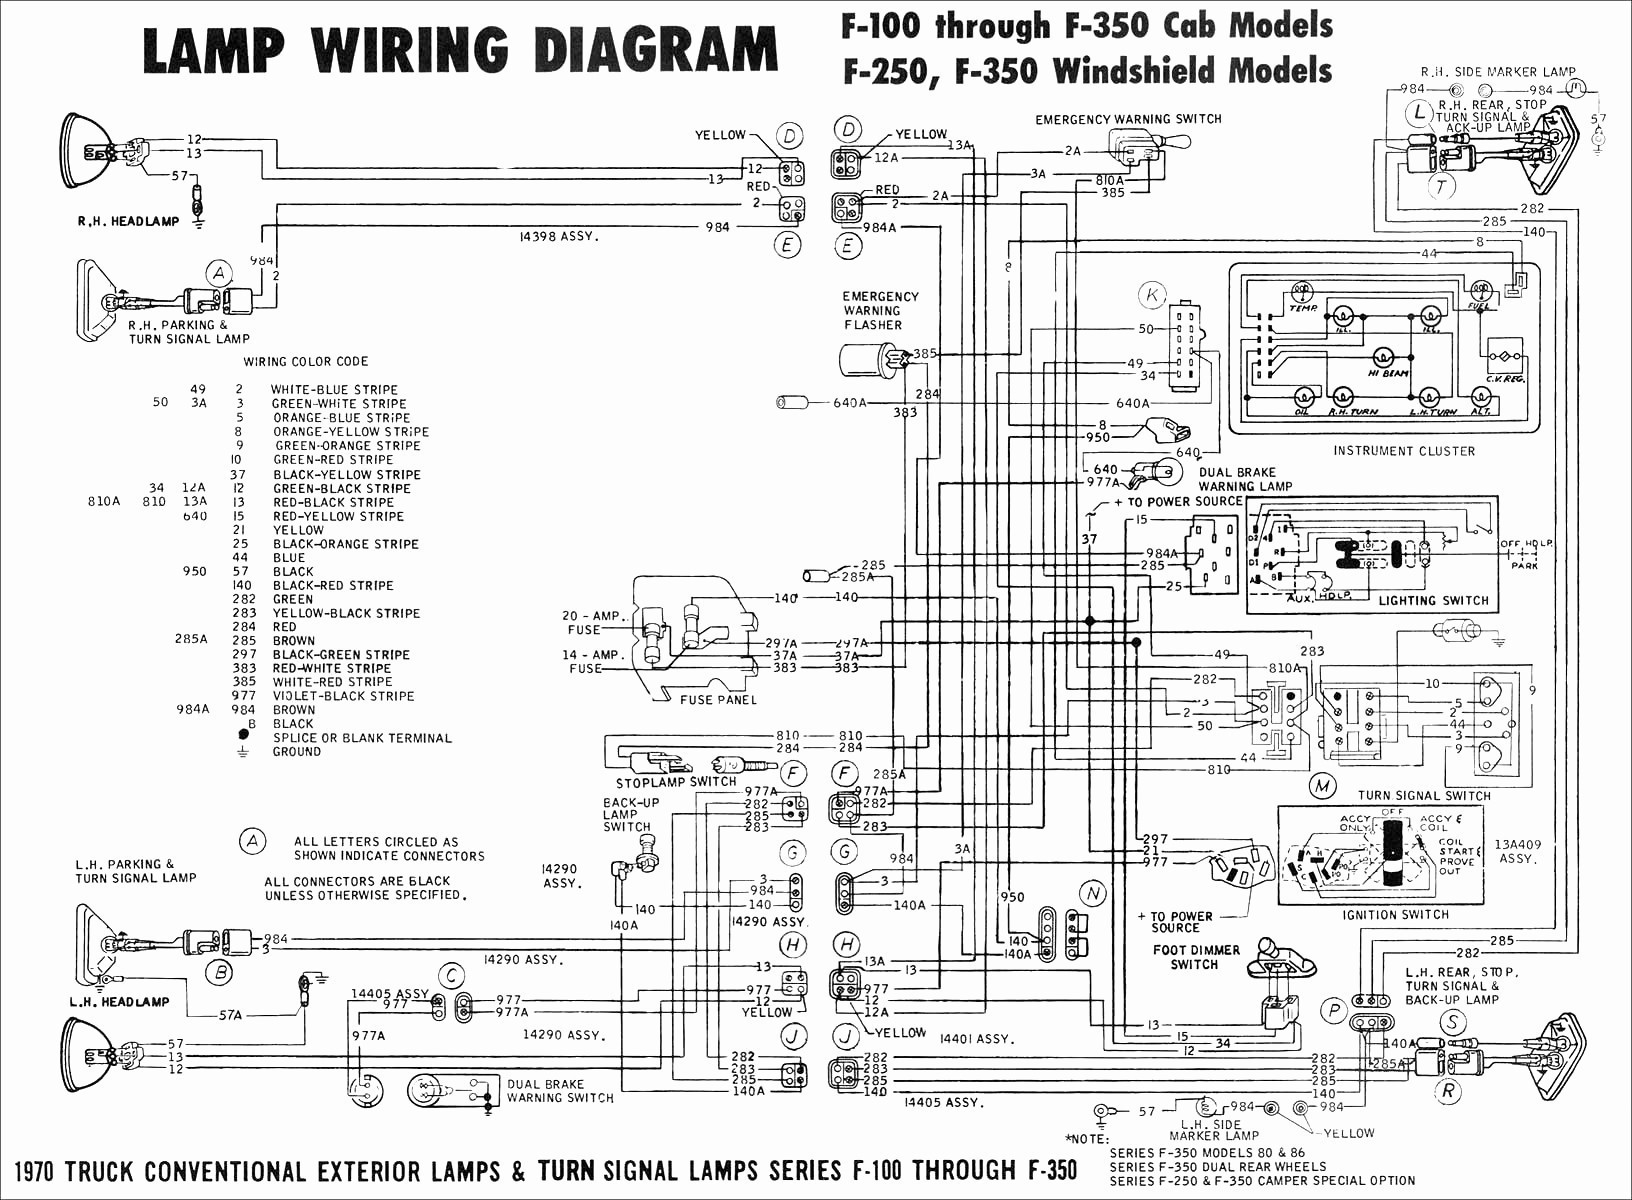 Wiring Diagram For A 1997 Ford F 250 Wiring Diagram List 1997 Ford F 250 Wiring Diagram